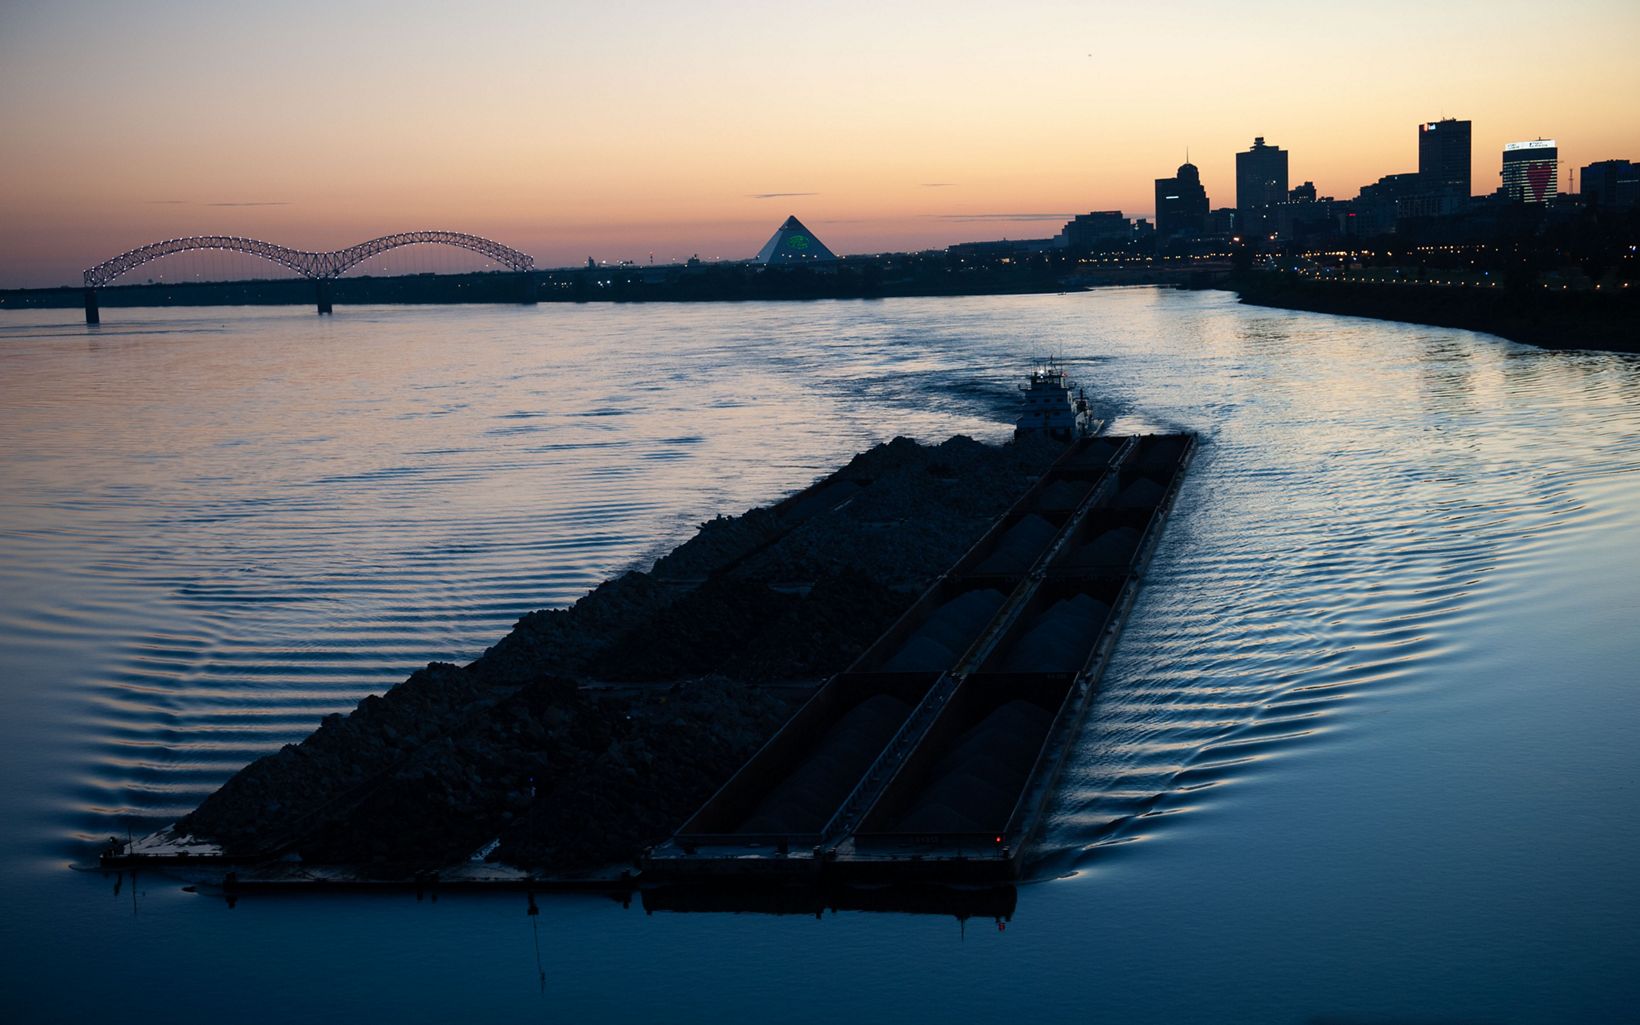 
                
                  Transportation Lifeline A barge makes its way downstream in Memphis. The Mississippi River is a source of industrial work throughout the basin and many people rely on it for economic sustenance.
                  © Rory Doyle
                
              